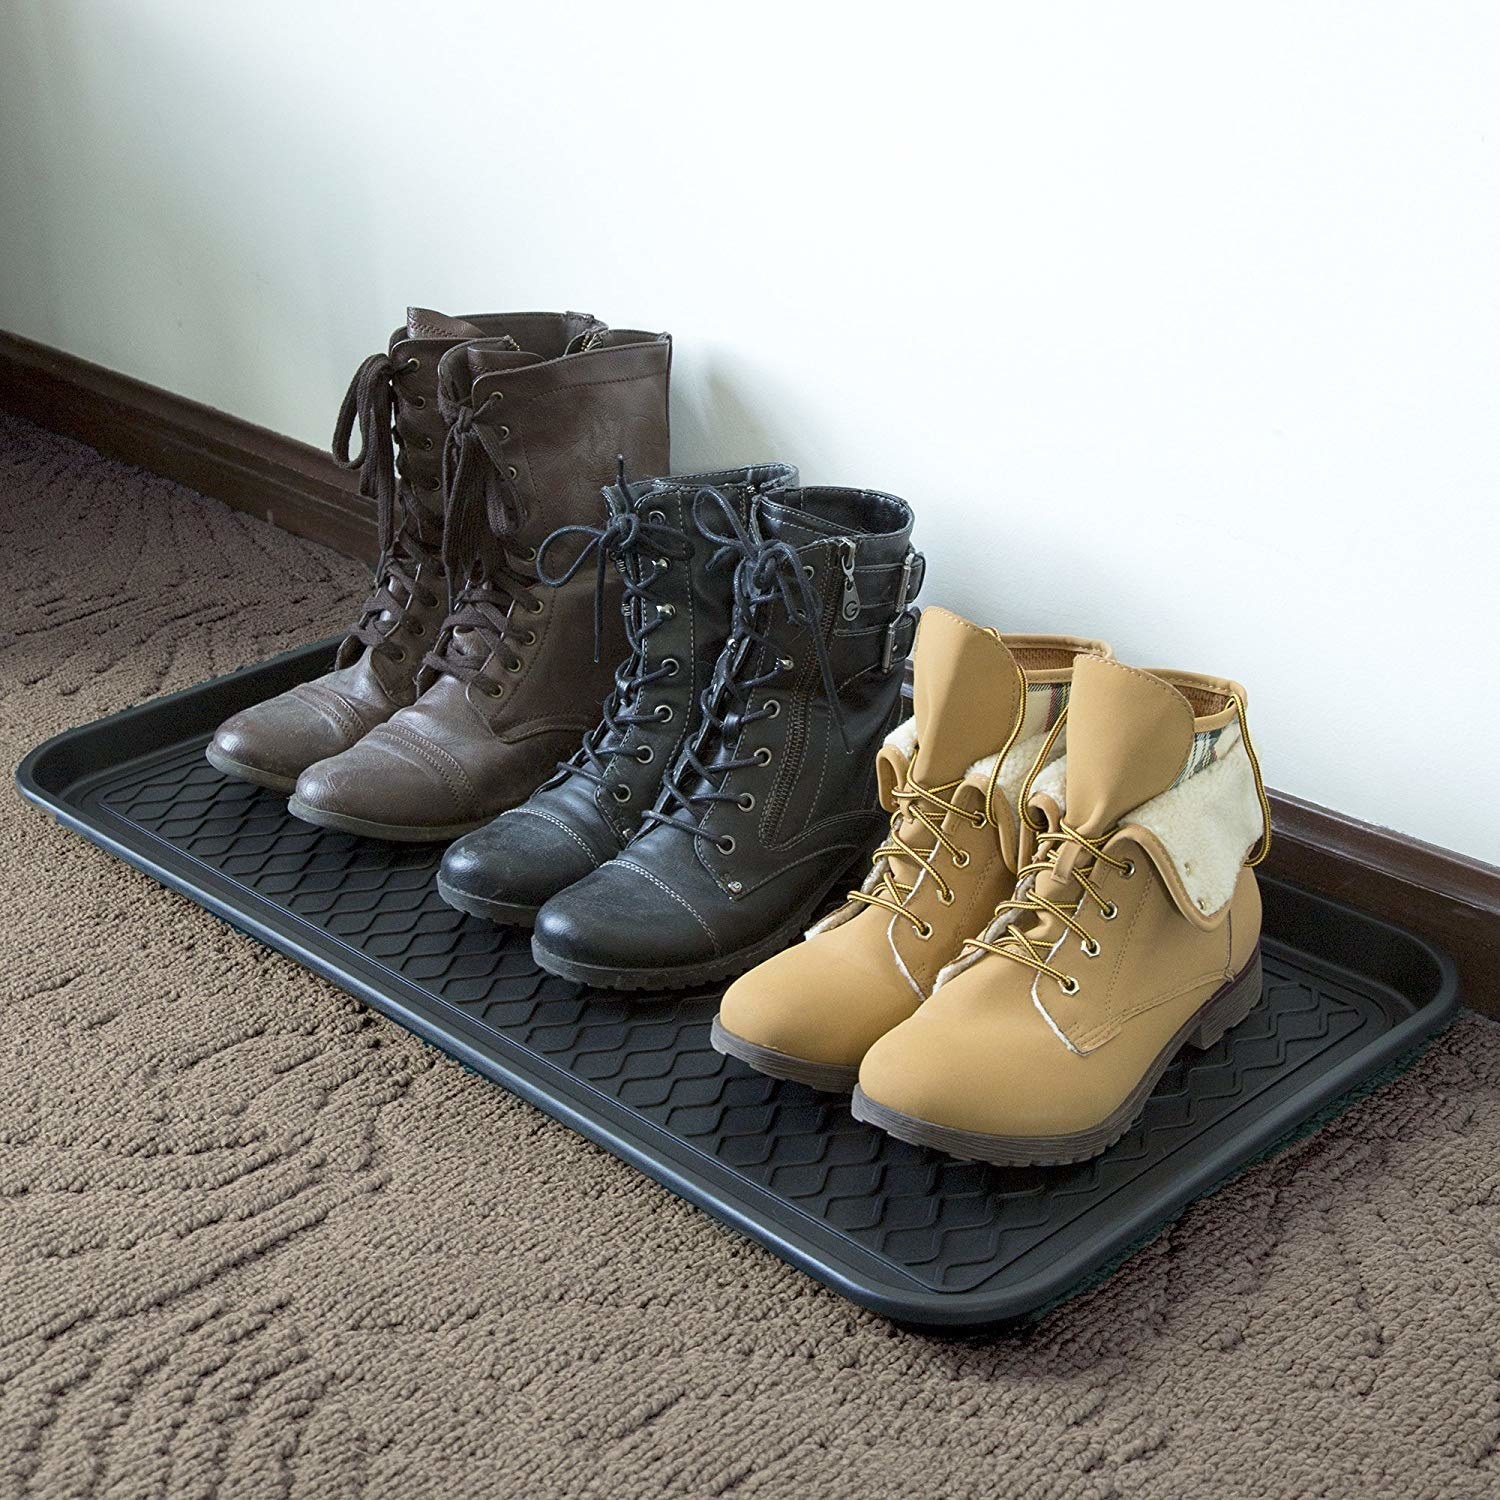 Tray on floor holding three pairs of boots